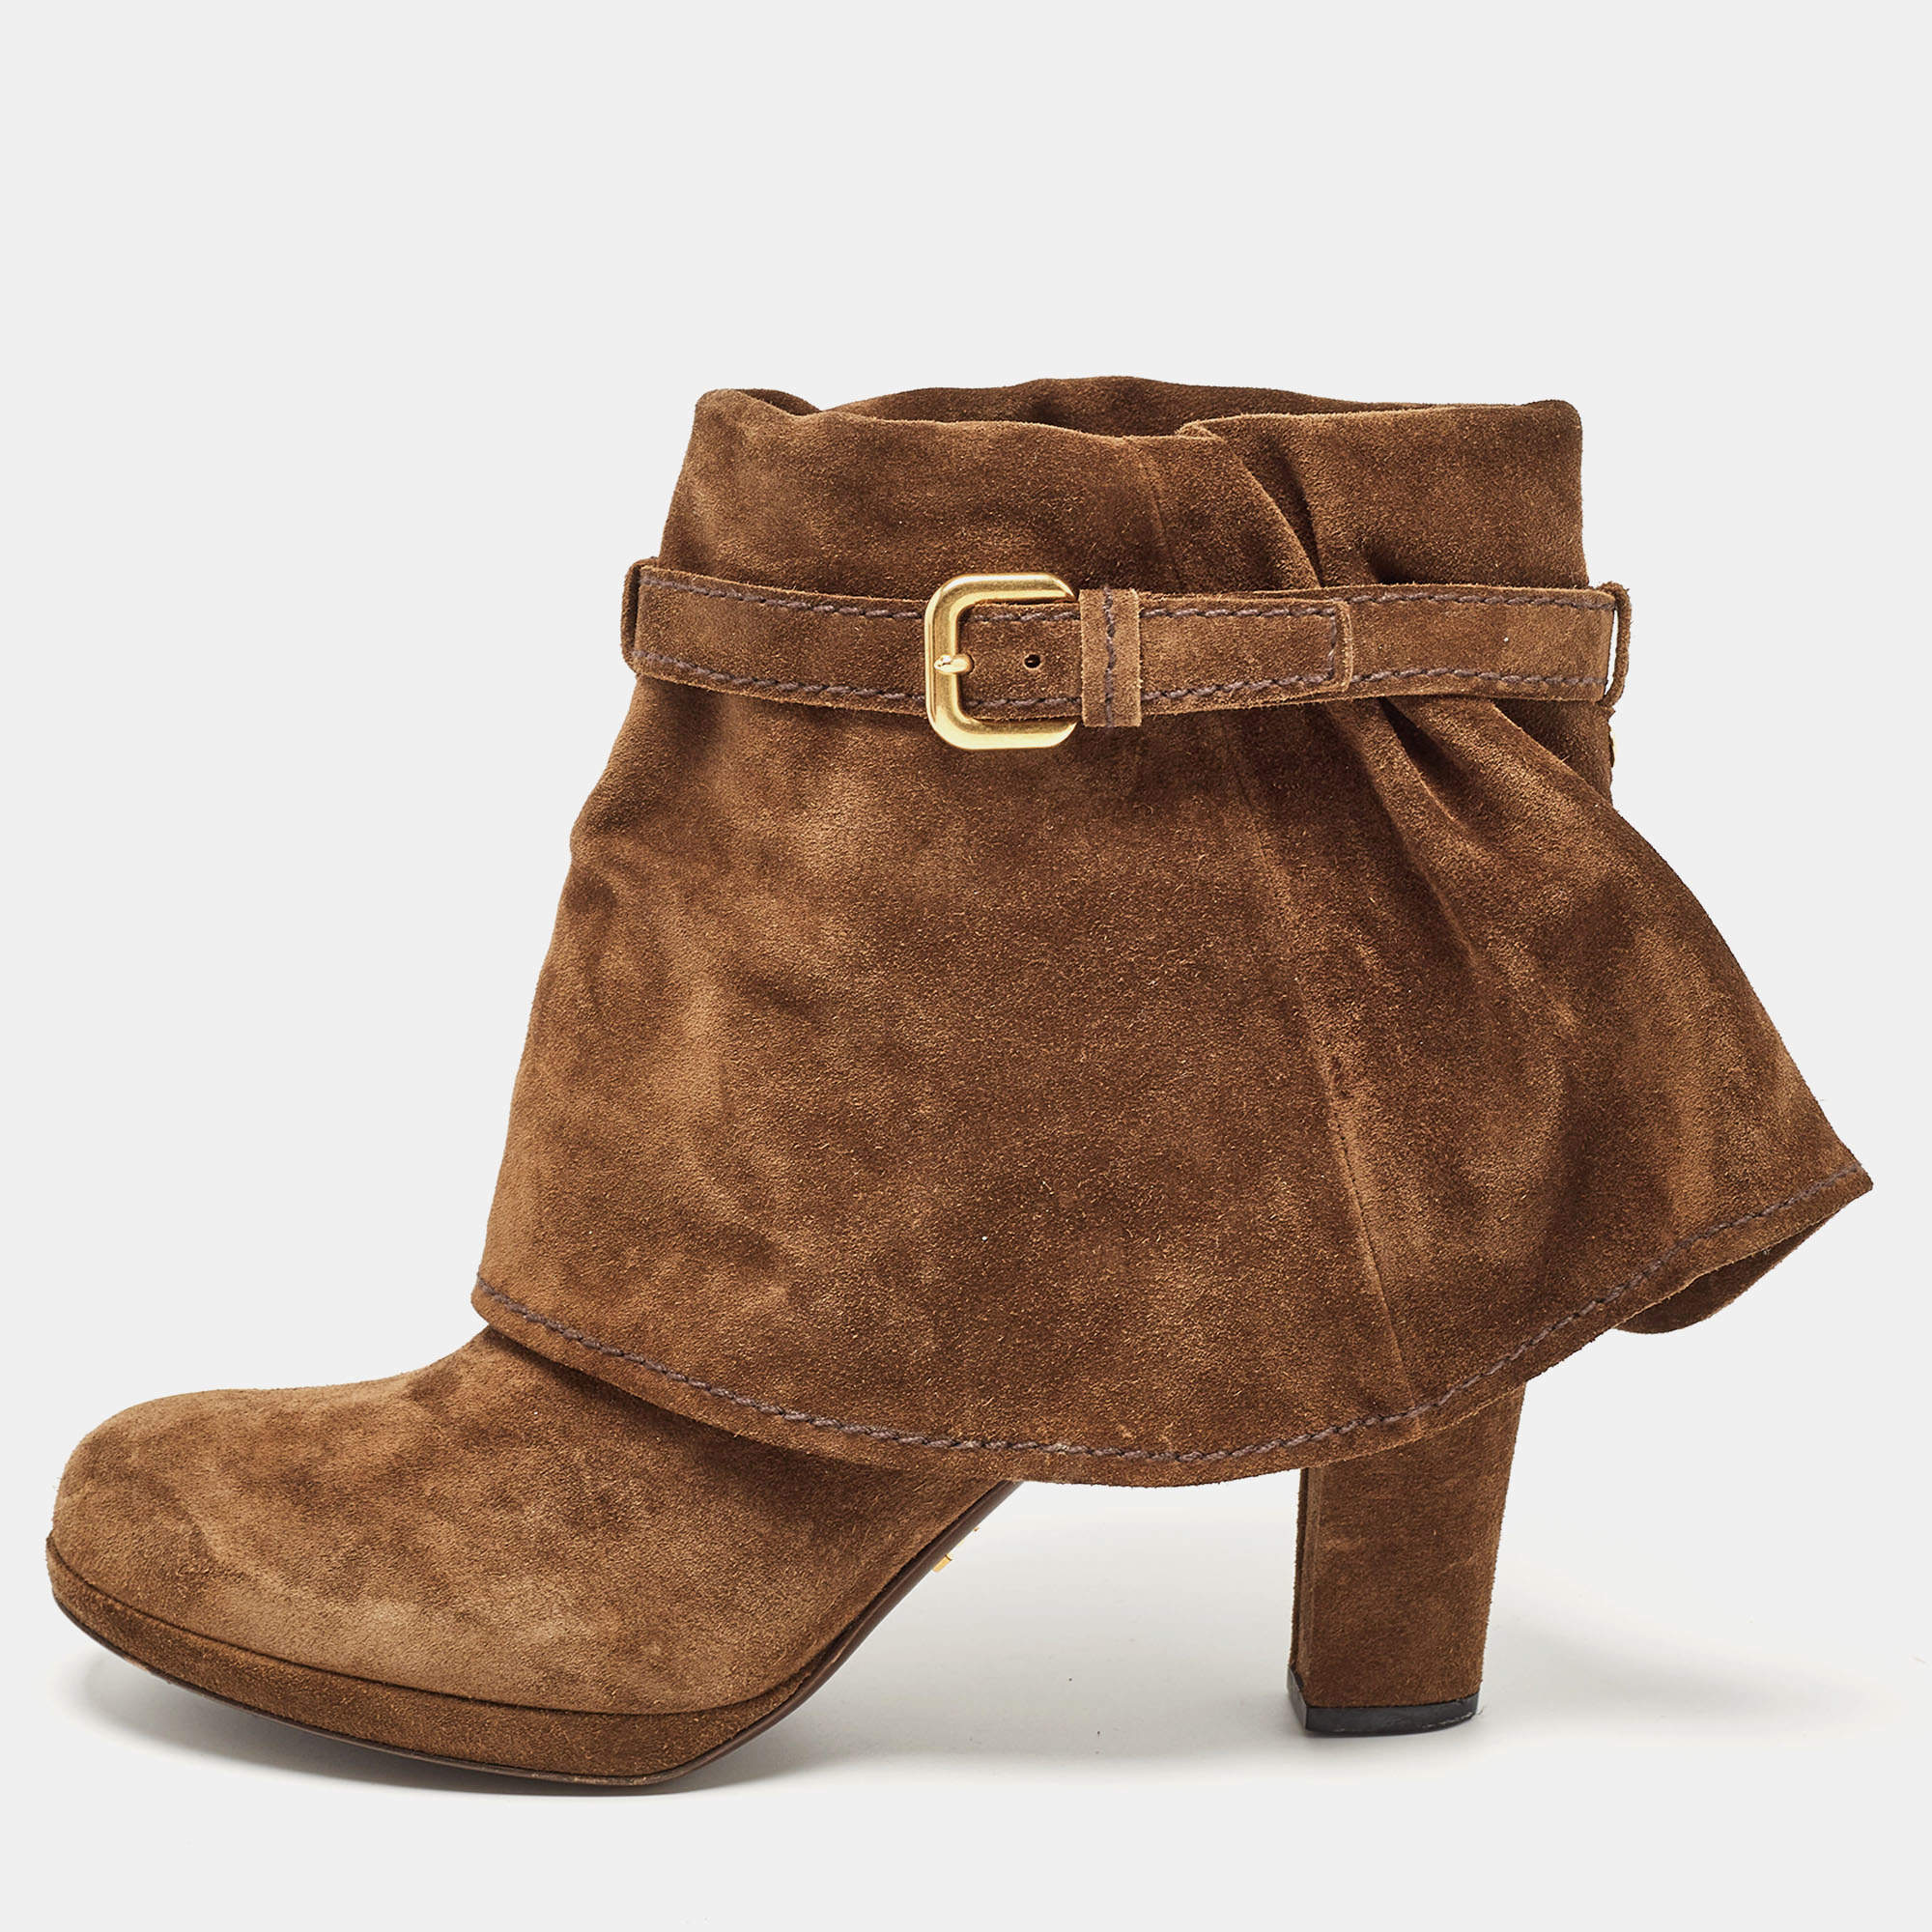 Prada Brown Suede Buckle Ankle Boots Size 39.5